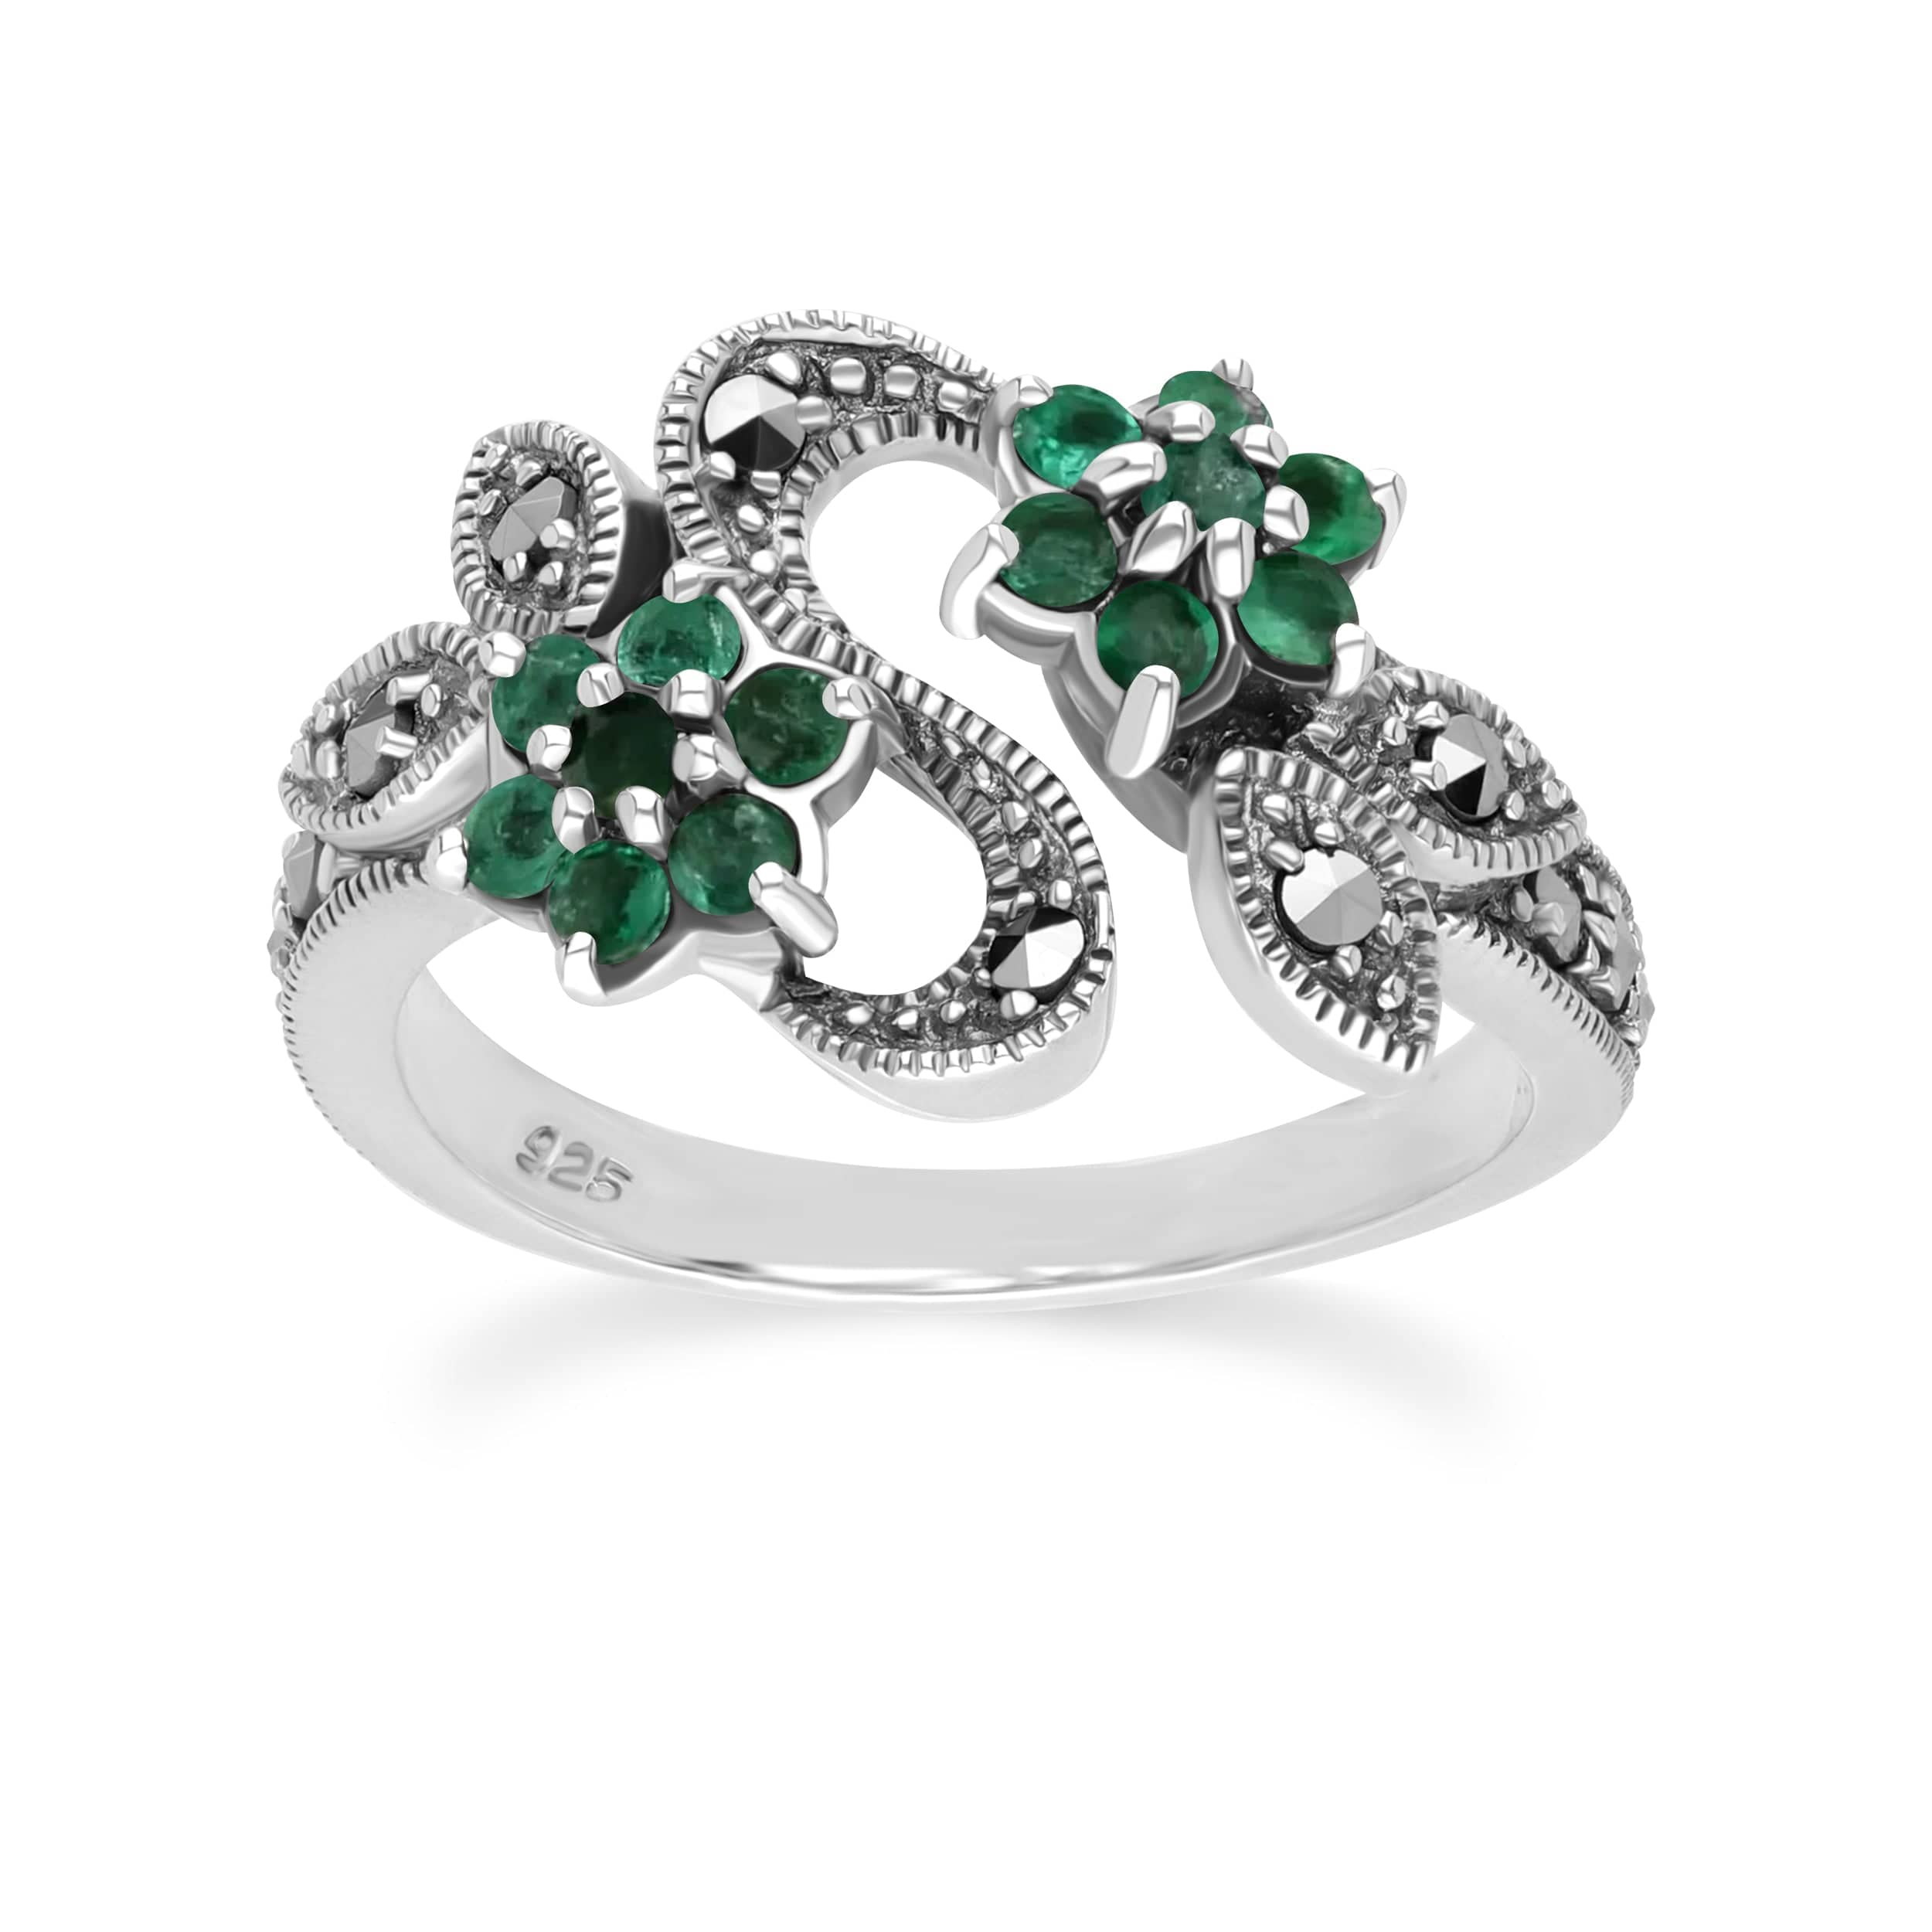 214R247402925 Art Nouveau Style Round Emerald & Marcasite Flower Ring in Sterling Silver 1